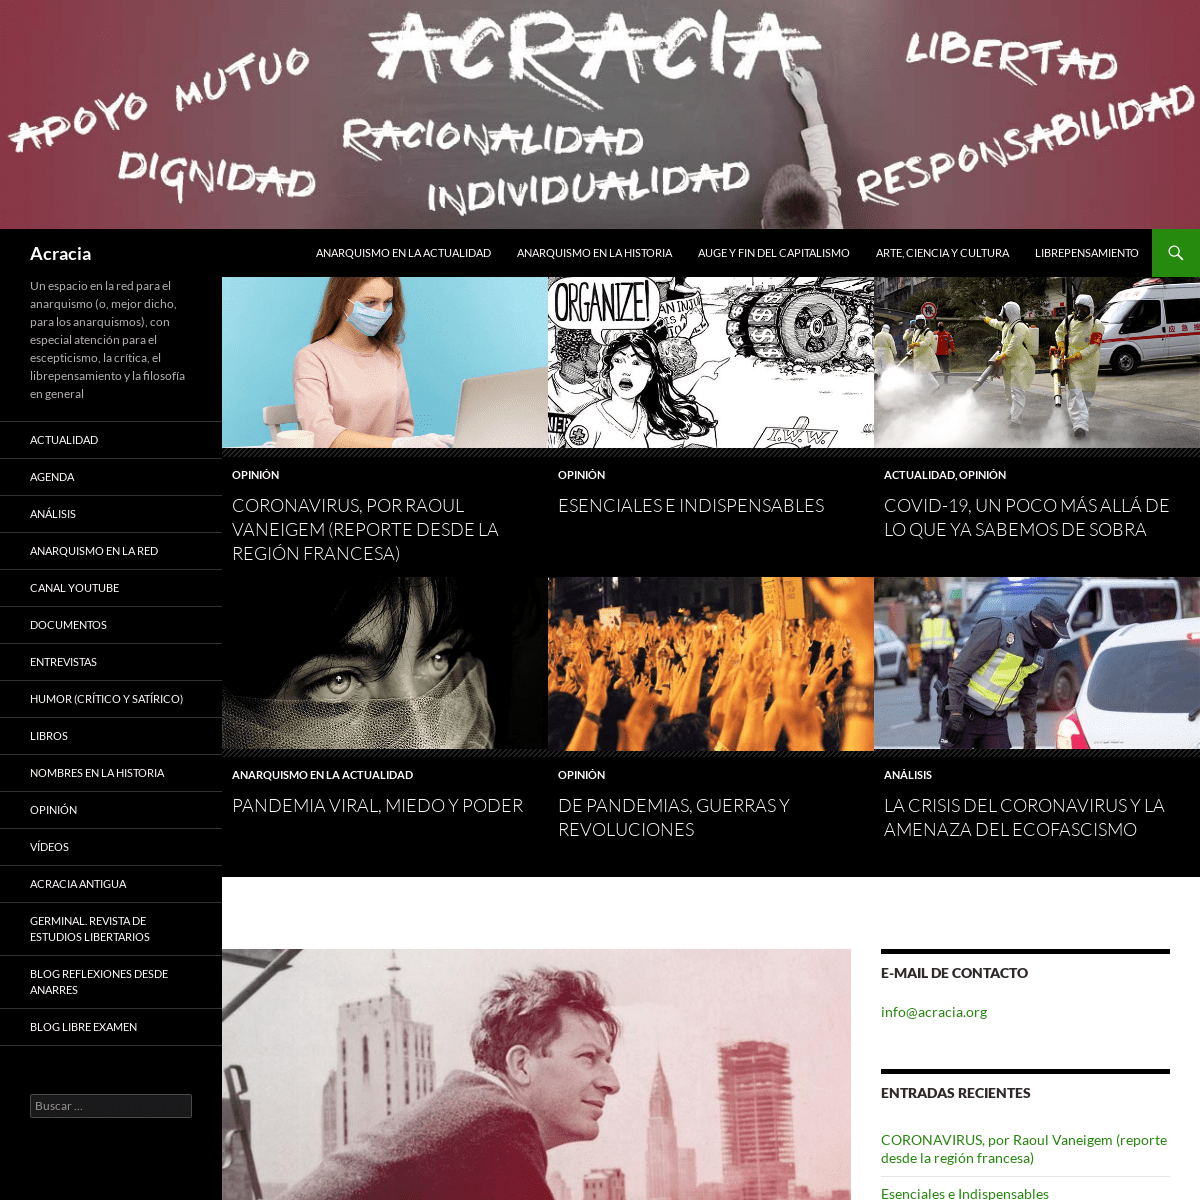 A complete backup of acracia.org